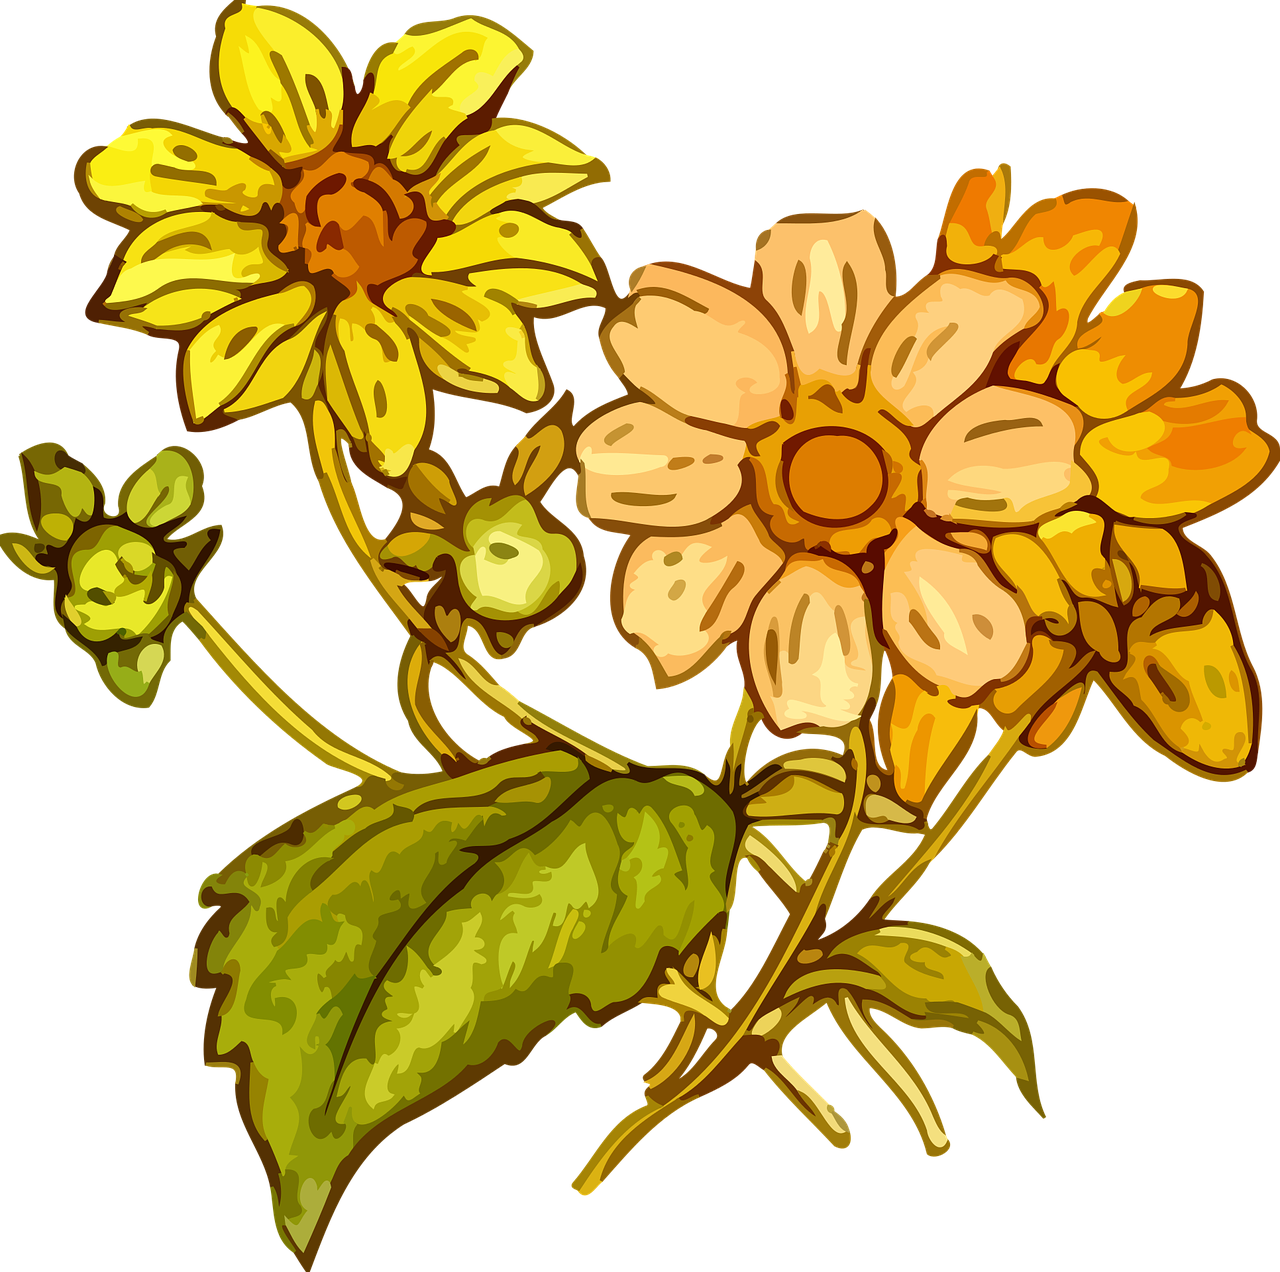 Wildflowers drawing - the best 2